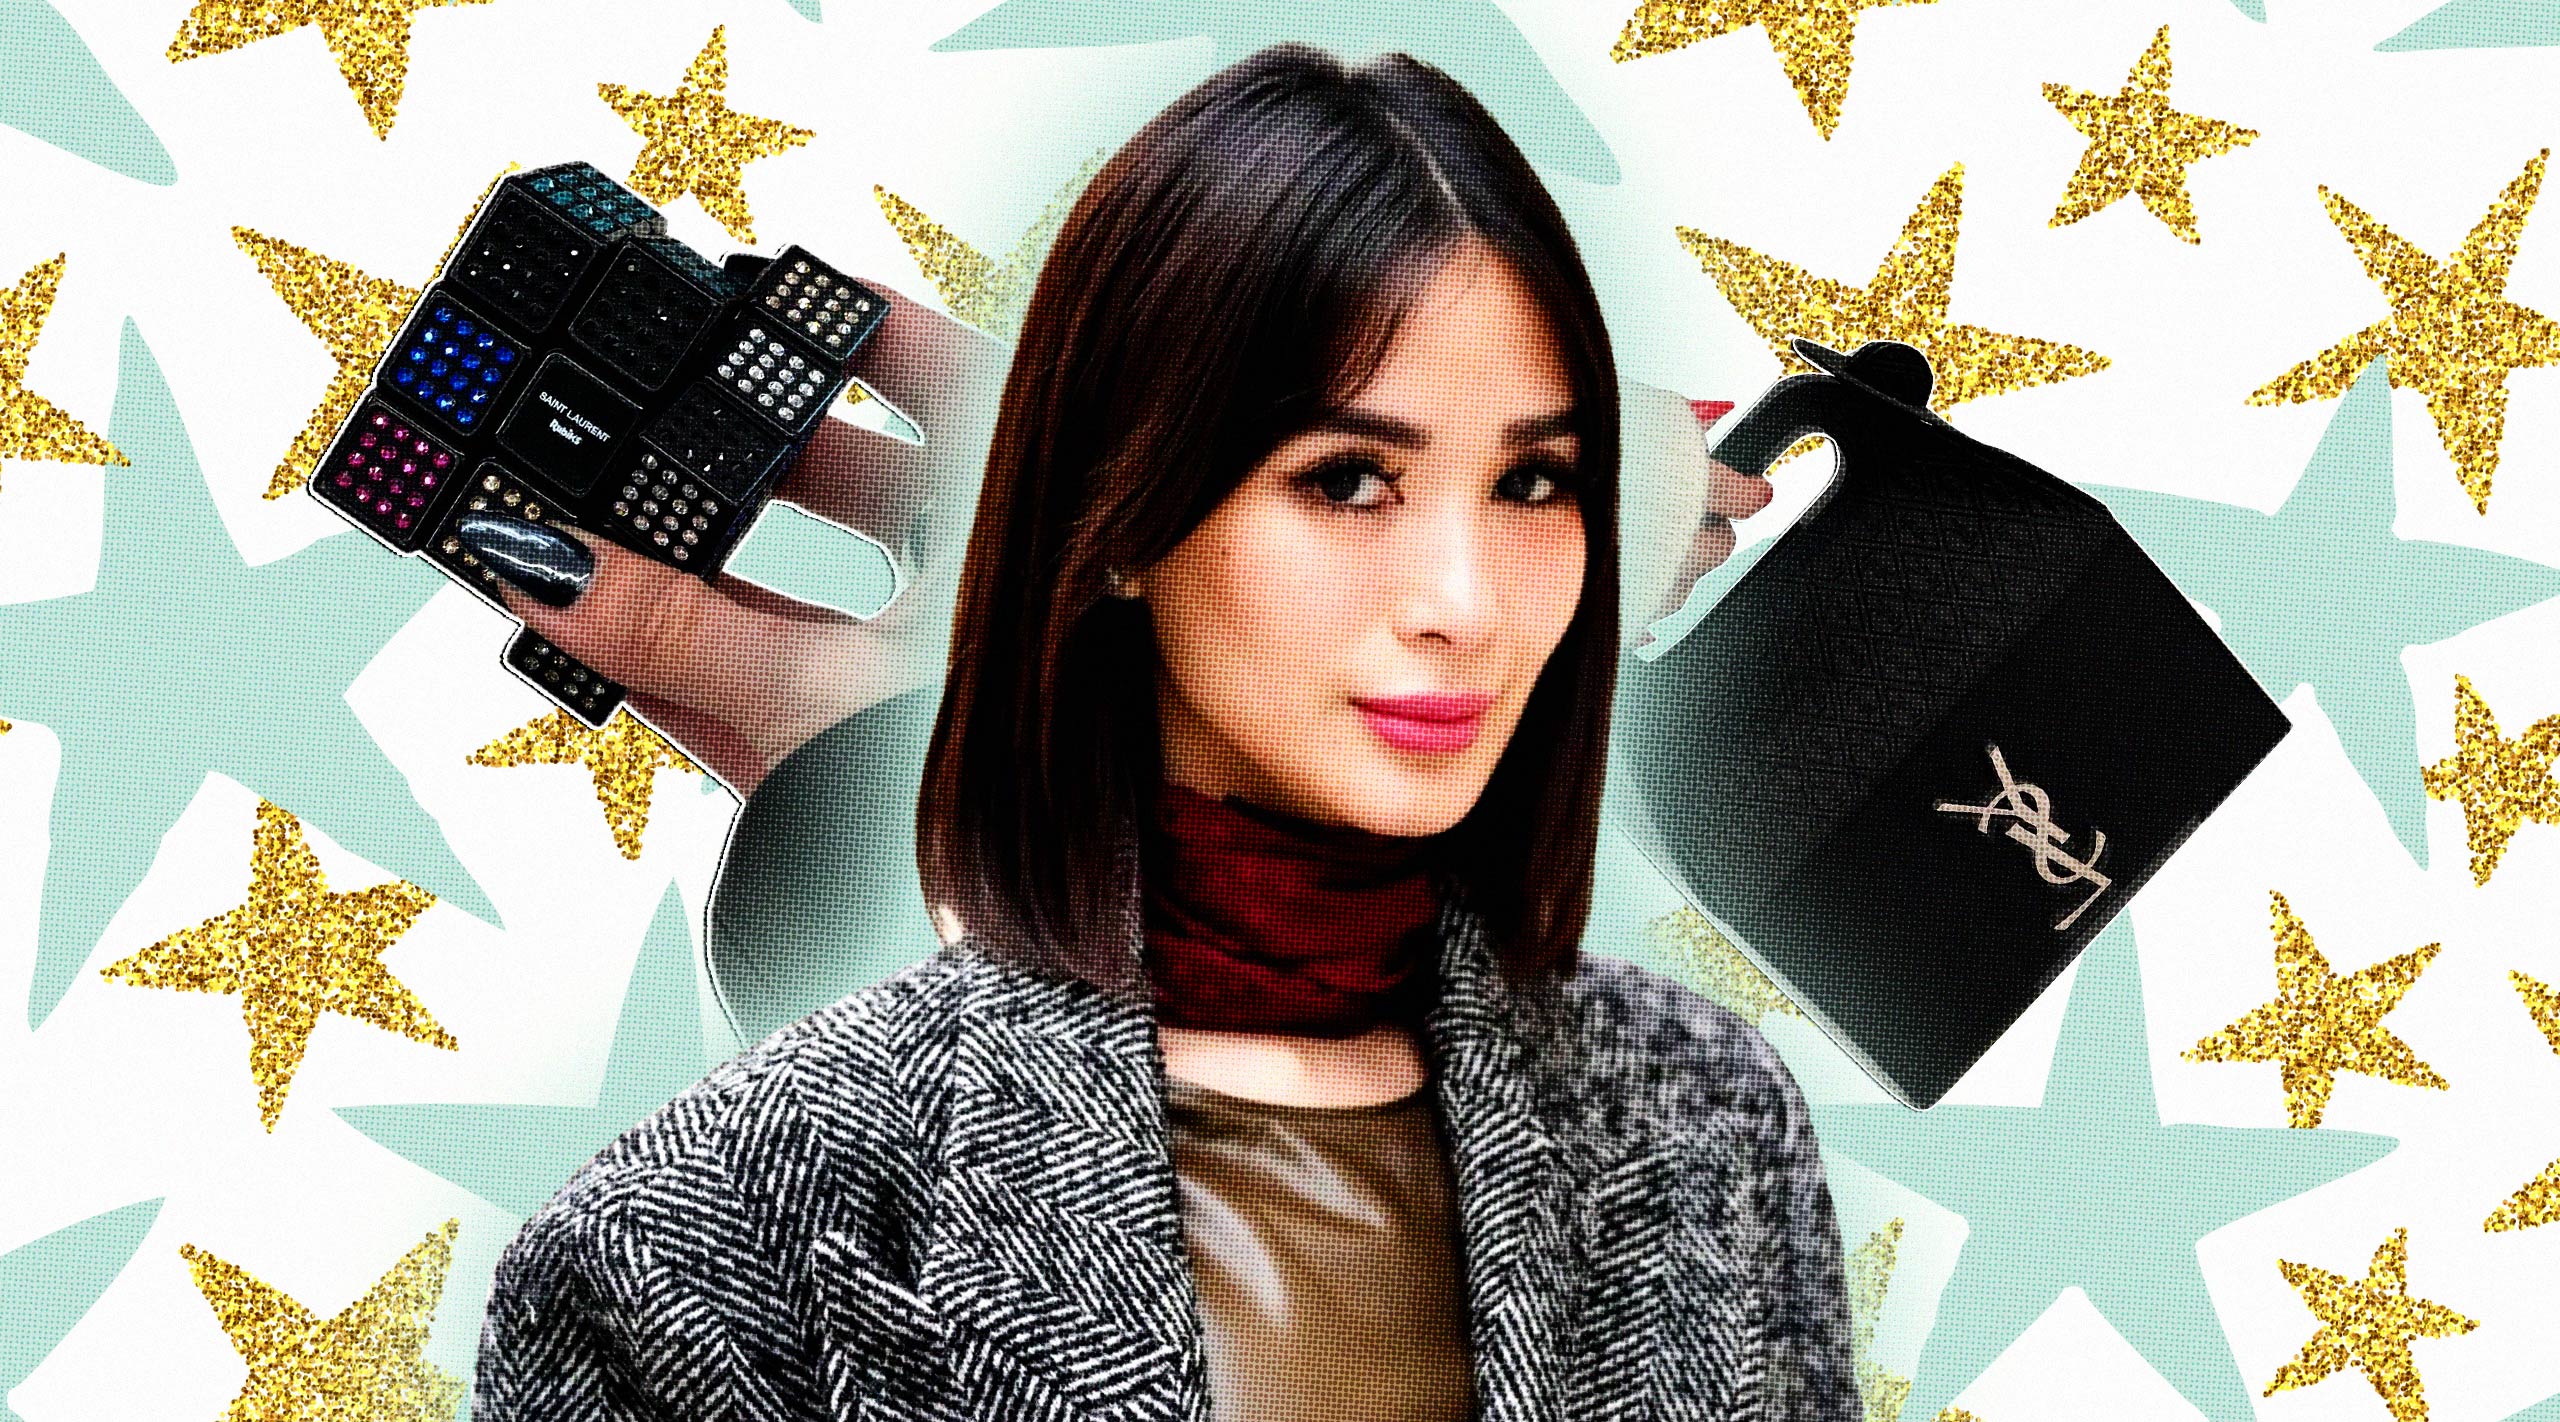 Heart Evangelista's 'out-of-stock' designer bag is a catch